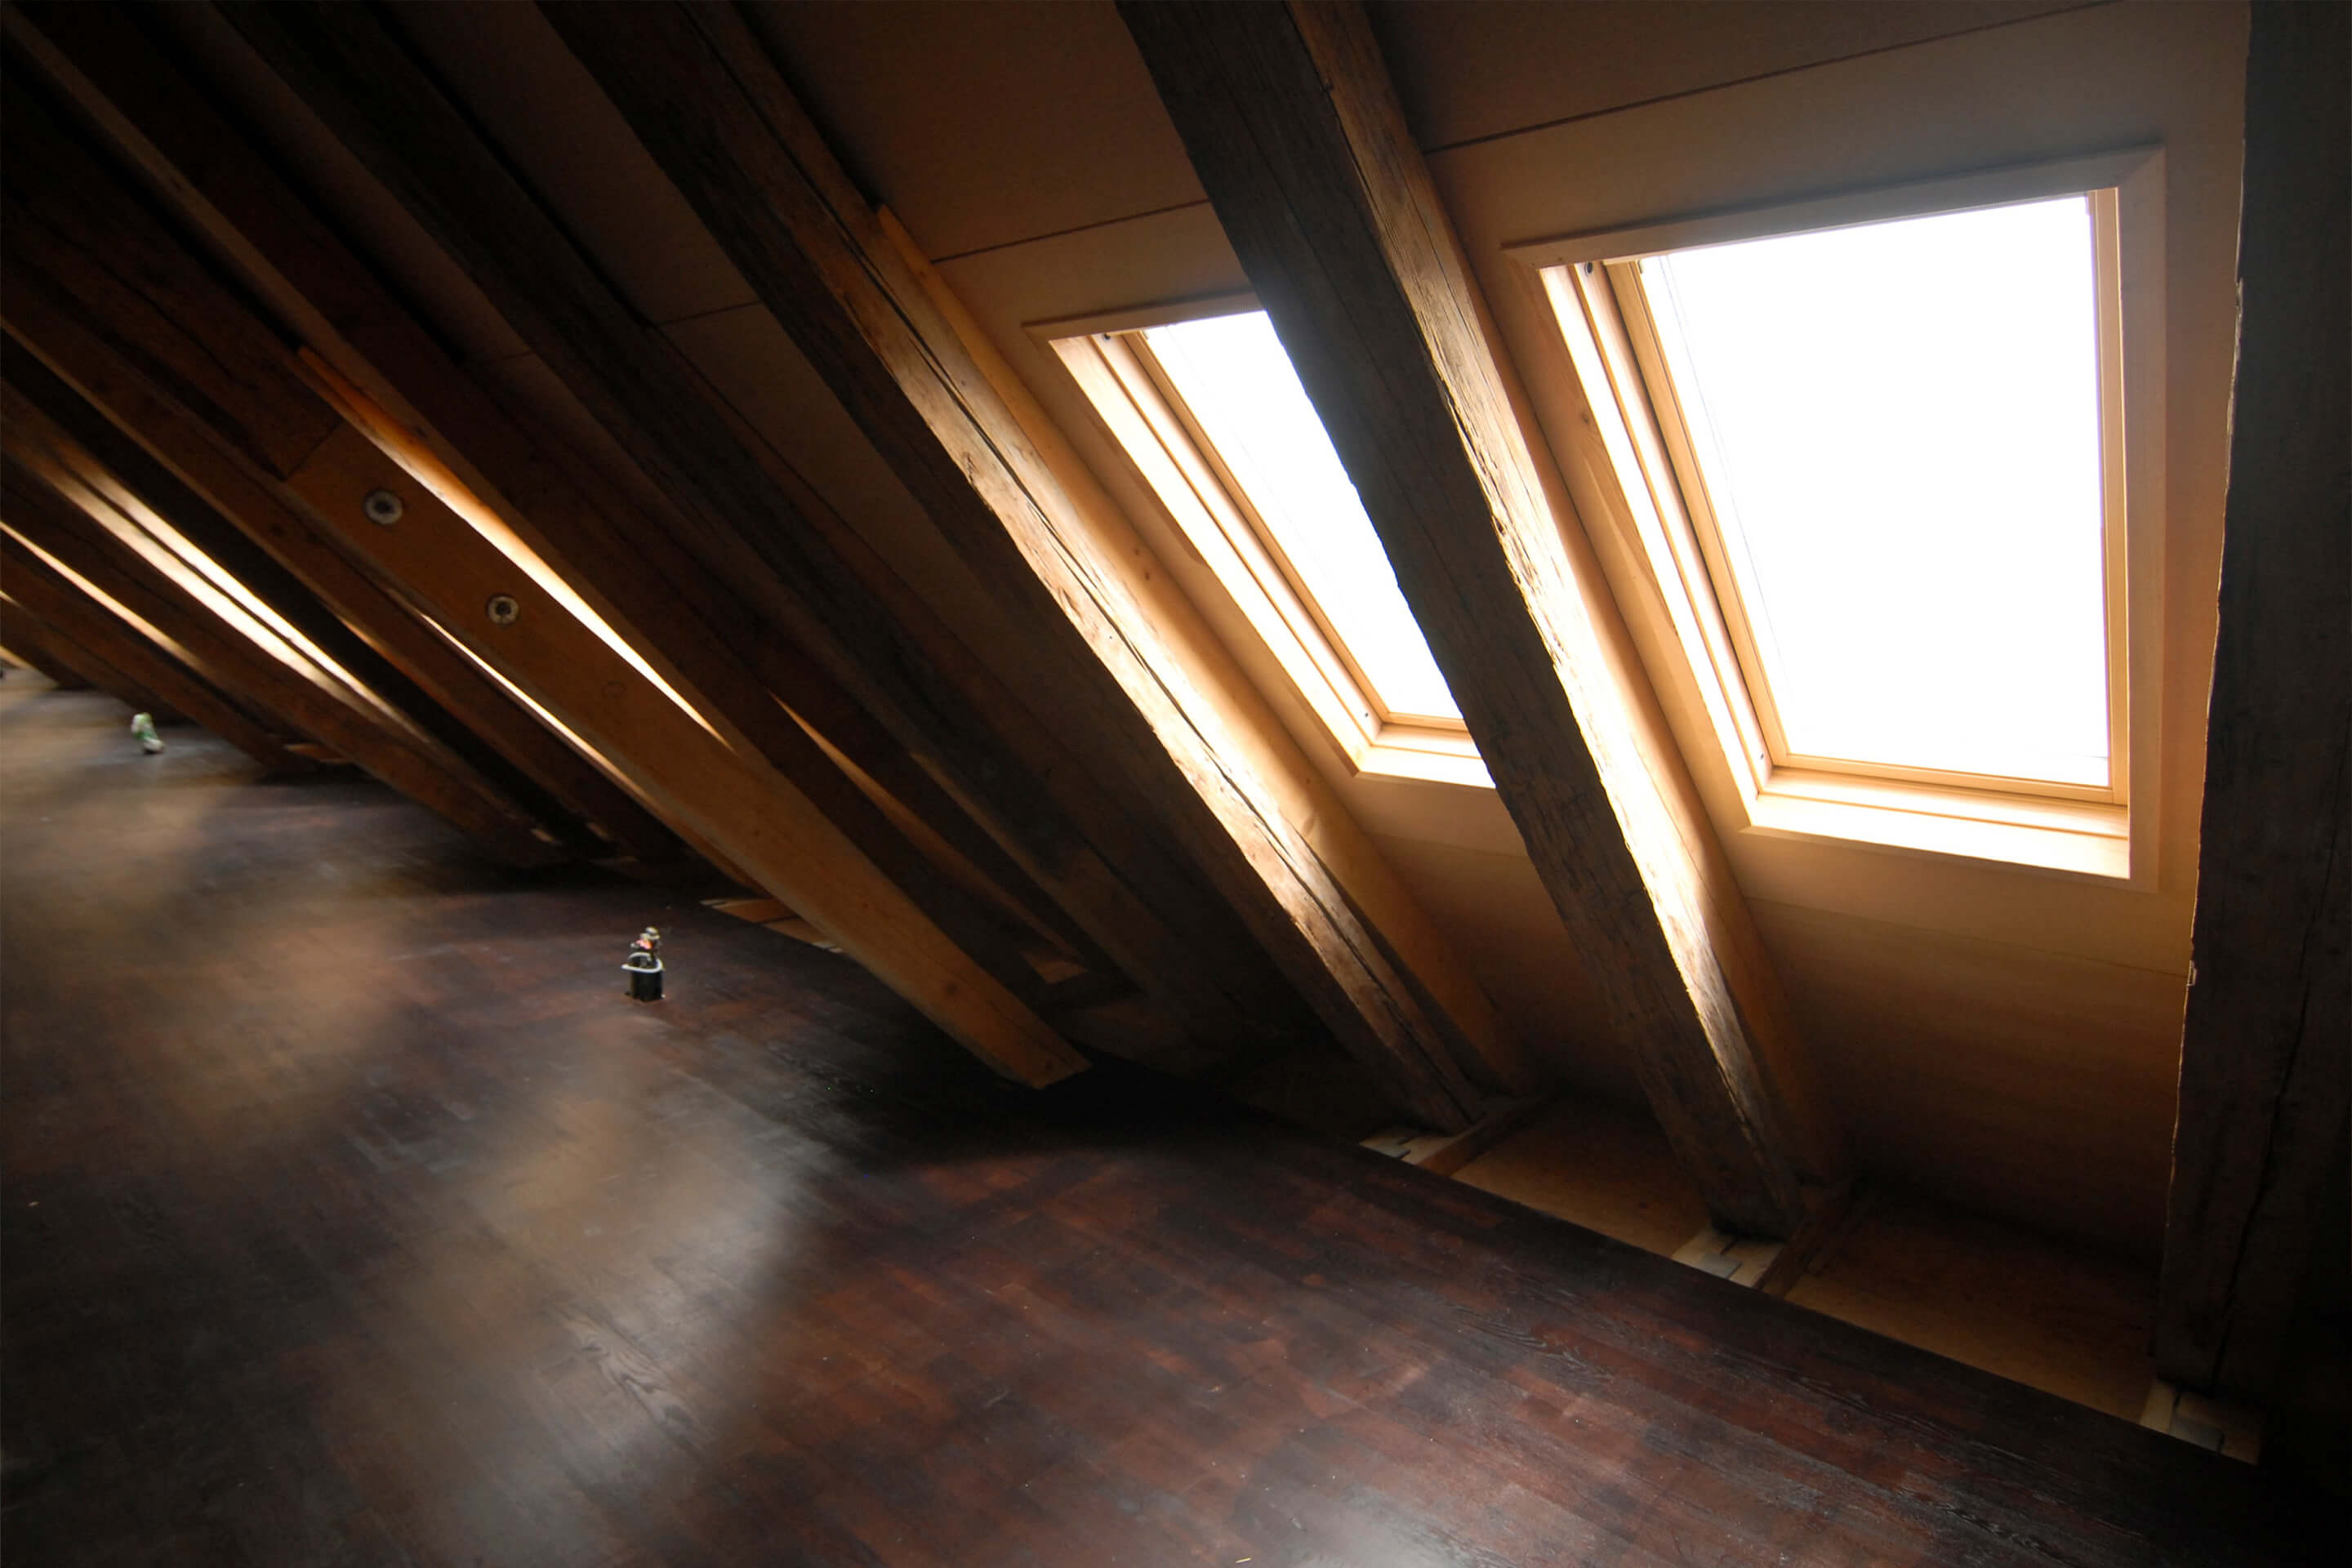 Attic space with sun light coming through roof windows